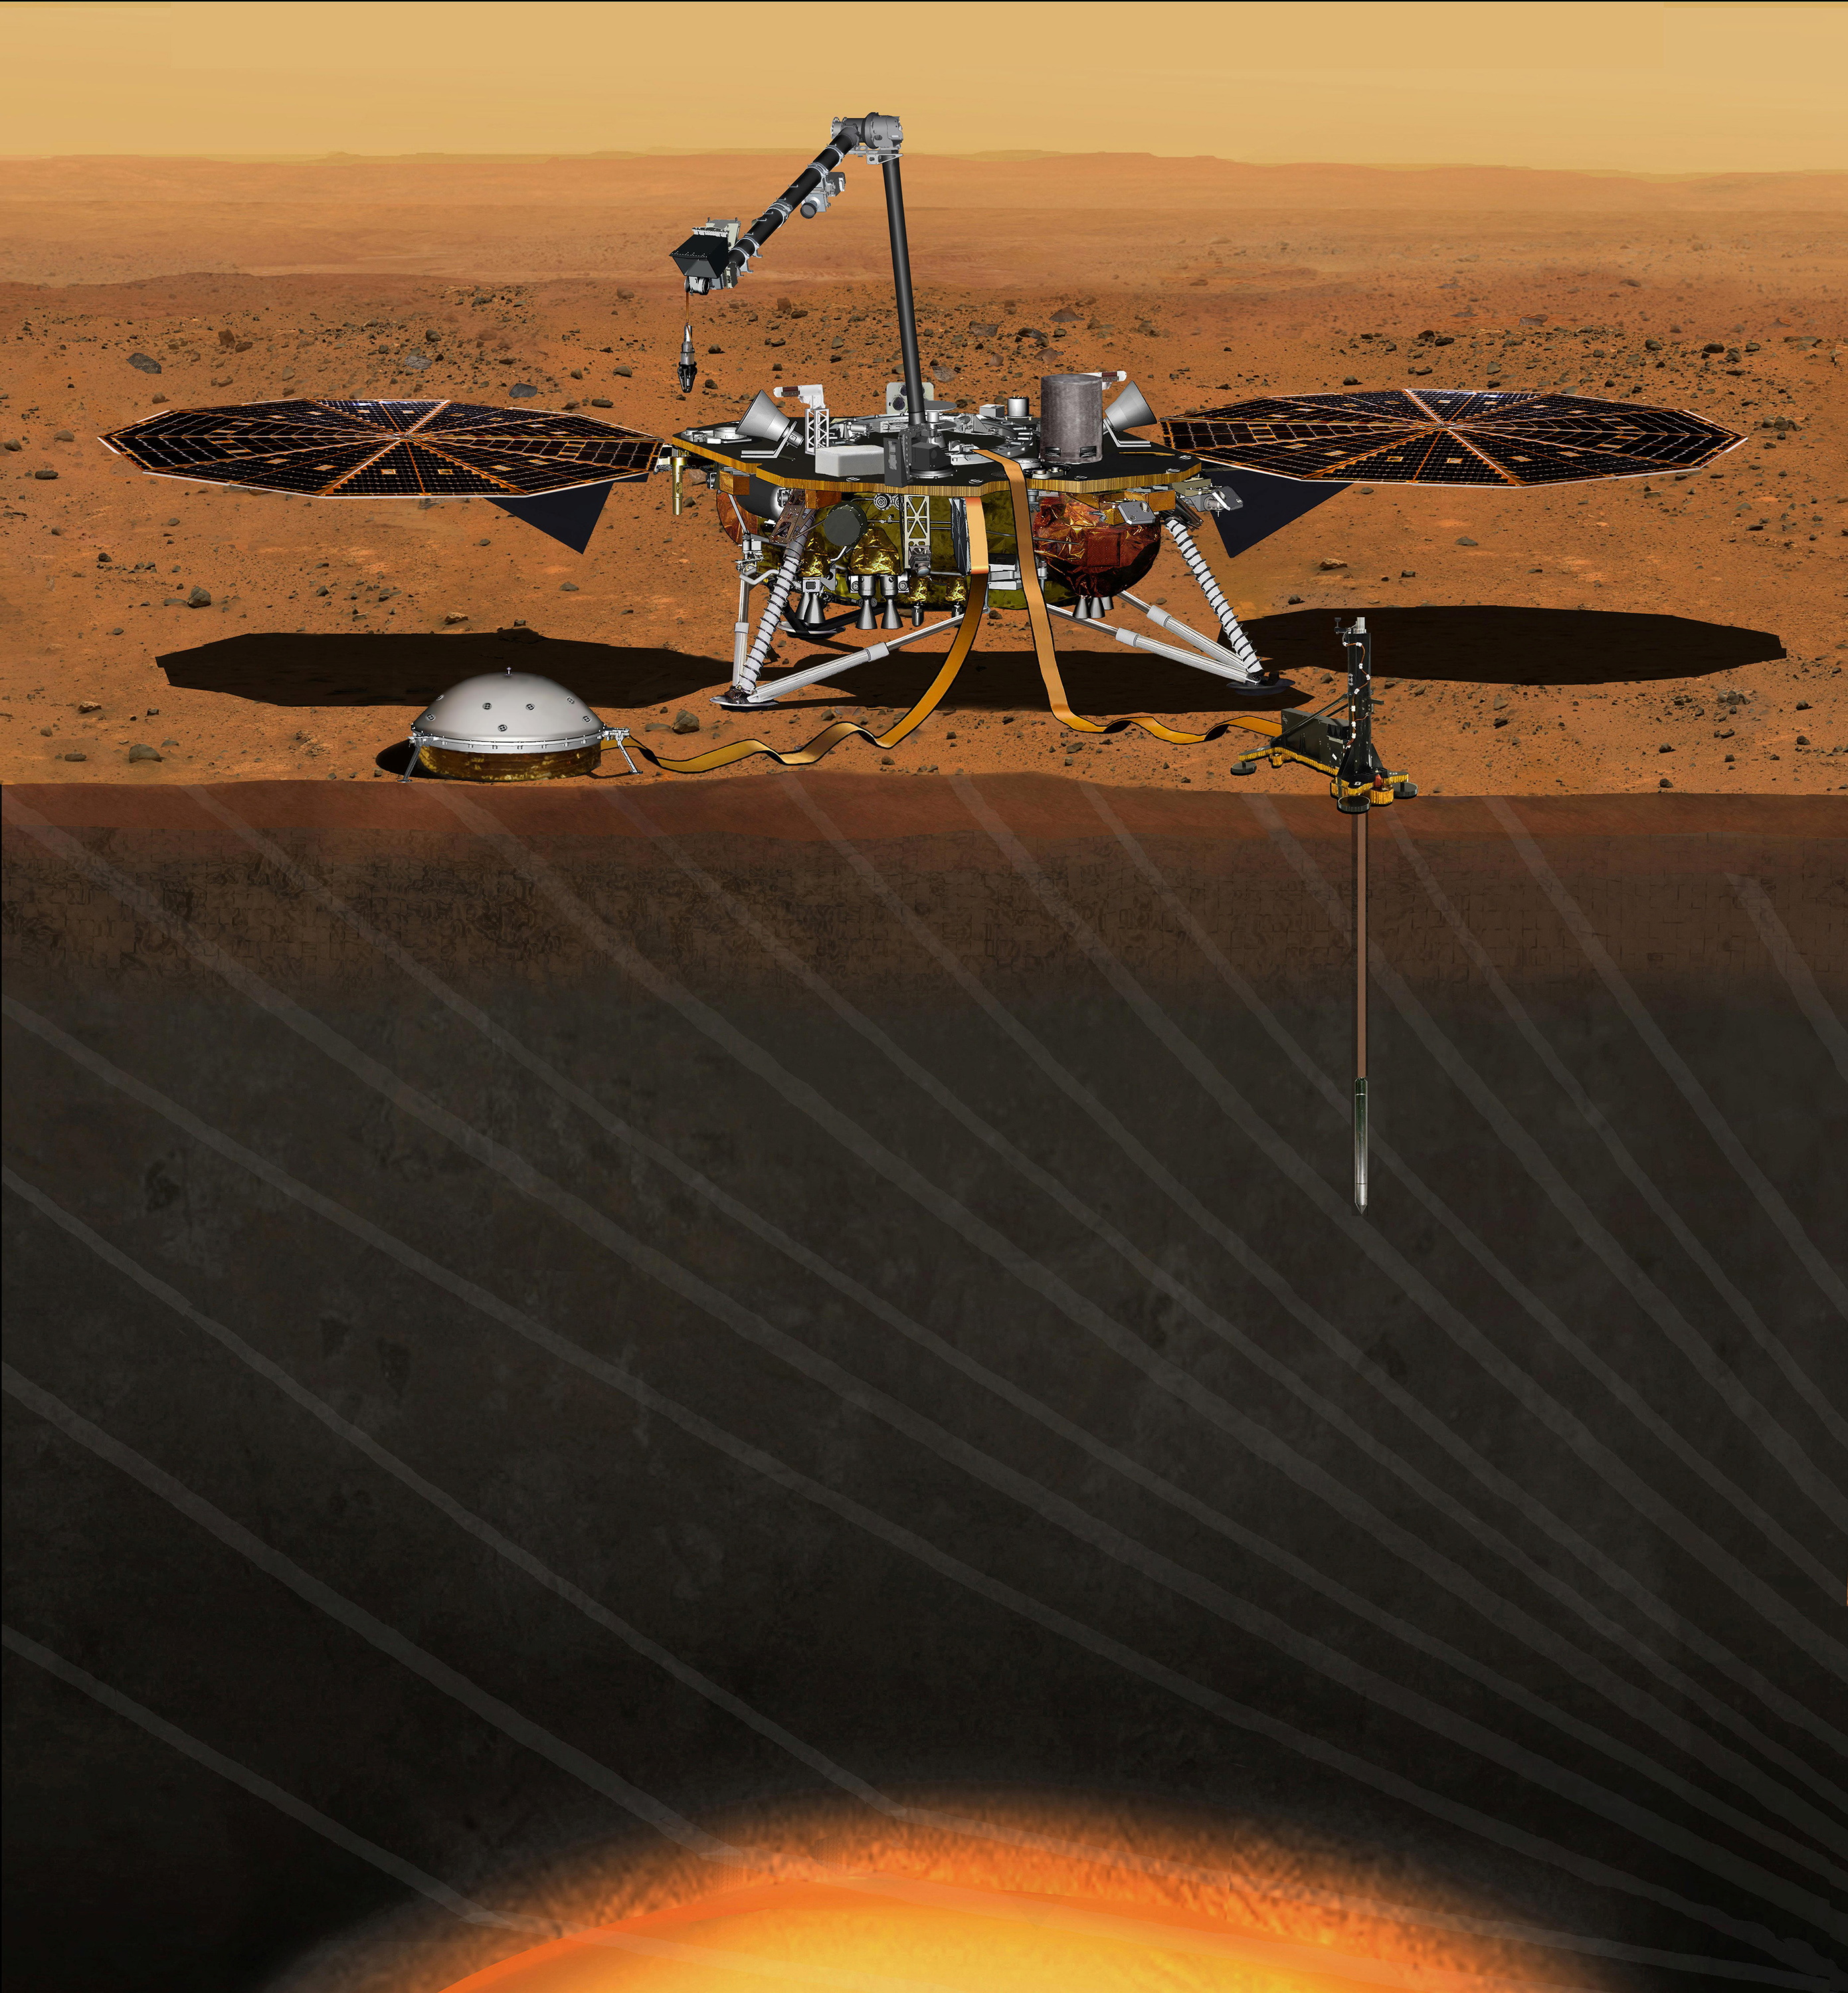 FILE PHOTO: The NASA Martian lander InSight dedicated to investigating the deep interior of Mars is seen in an undated artist's rendering.   REUTERS/NASA/JPL-Caltech/Handout via Reuters   THIS IMAGE HAS BEEN SUPPLIED BY A THIRD PARTY. IT IS DISTRIBUTED, EXACTLY AS RECEIVED BY REUTERS, AS A SERVICE TO CLIENTS. FOR EDITORIAL USE ONLY. NOT FOR SALE FOR MARKETING OR ADVERTISING CAMPAIGNS/File Photo